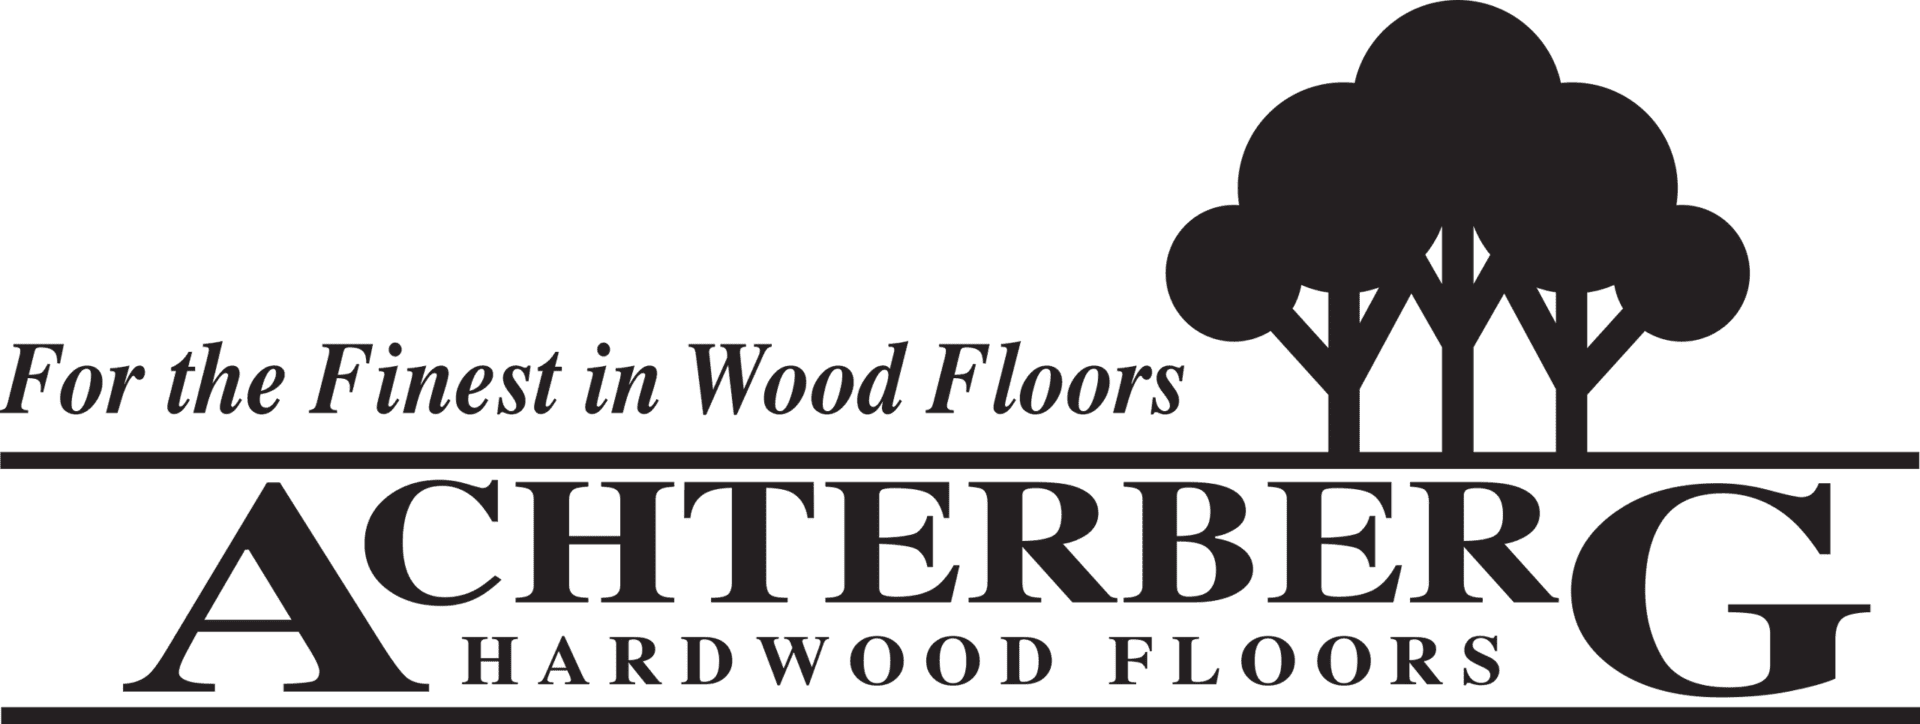 A green banner with the words " waterbury hardwood floors ".